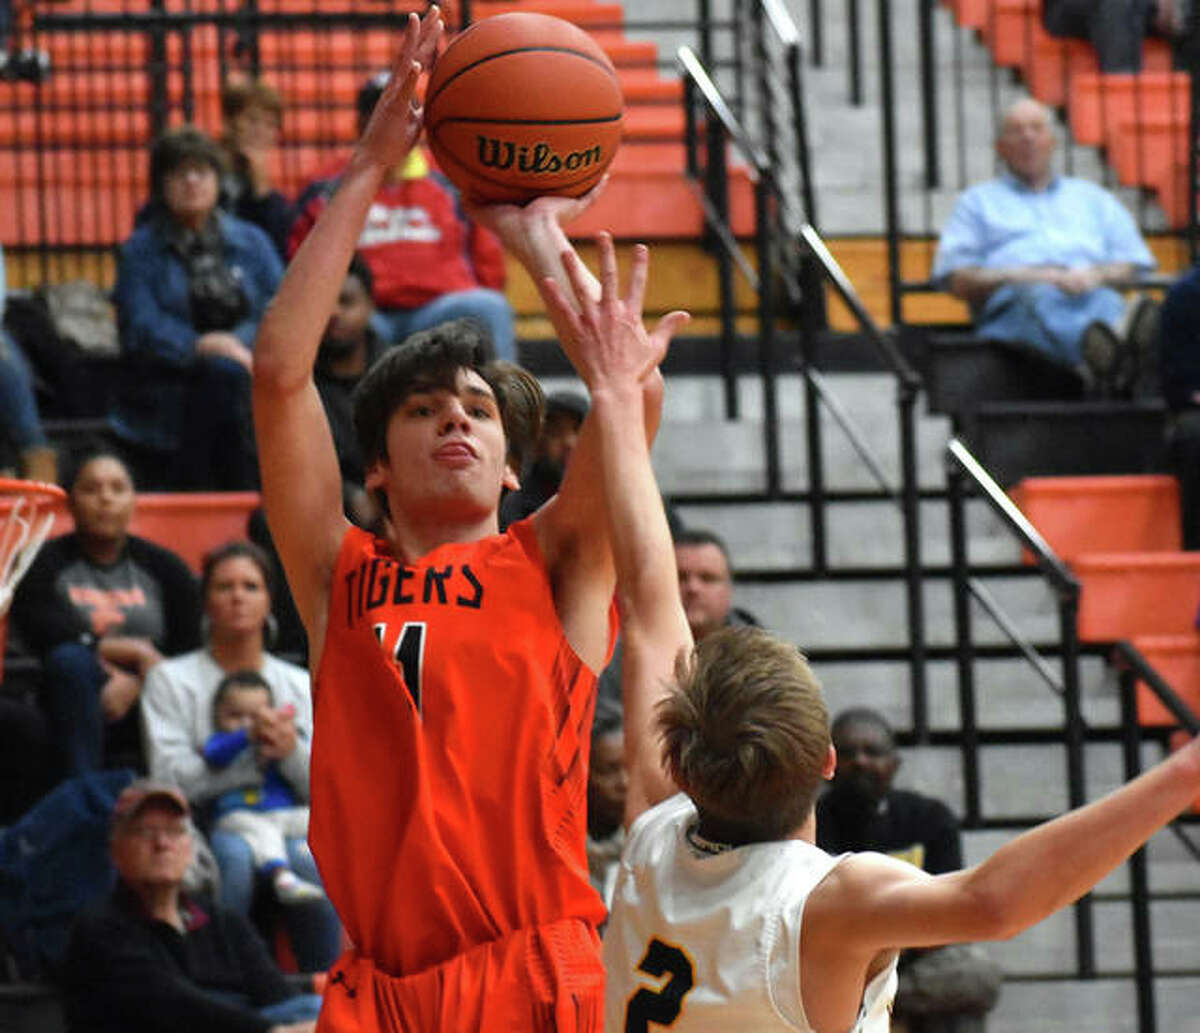 Edwardsville’s Brennan Weller puts up a shot from the corner during the Class 4A Edwardsville Regional championship game against O’Fallon last season.